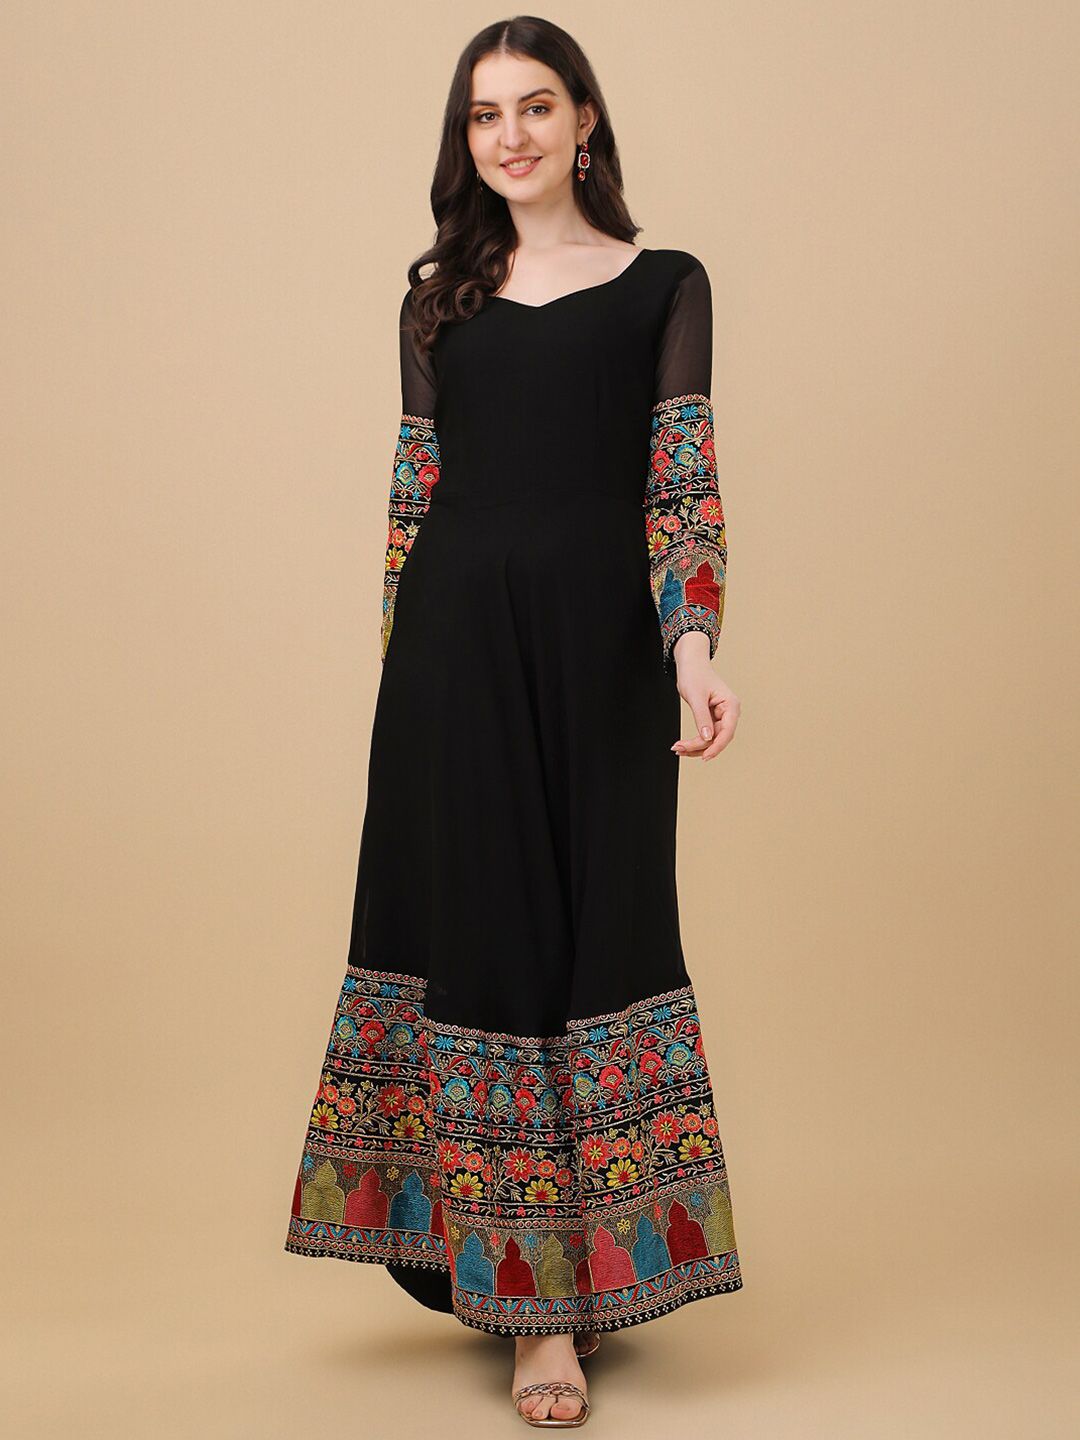 Vidraa Western Store Black Floral Embroidered Georgette Maxi Dress Price in India